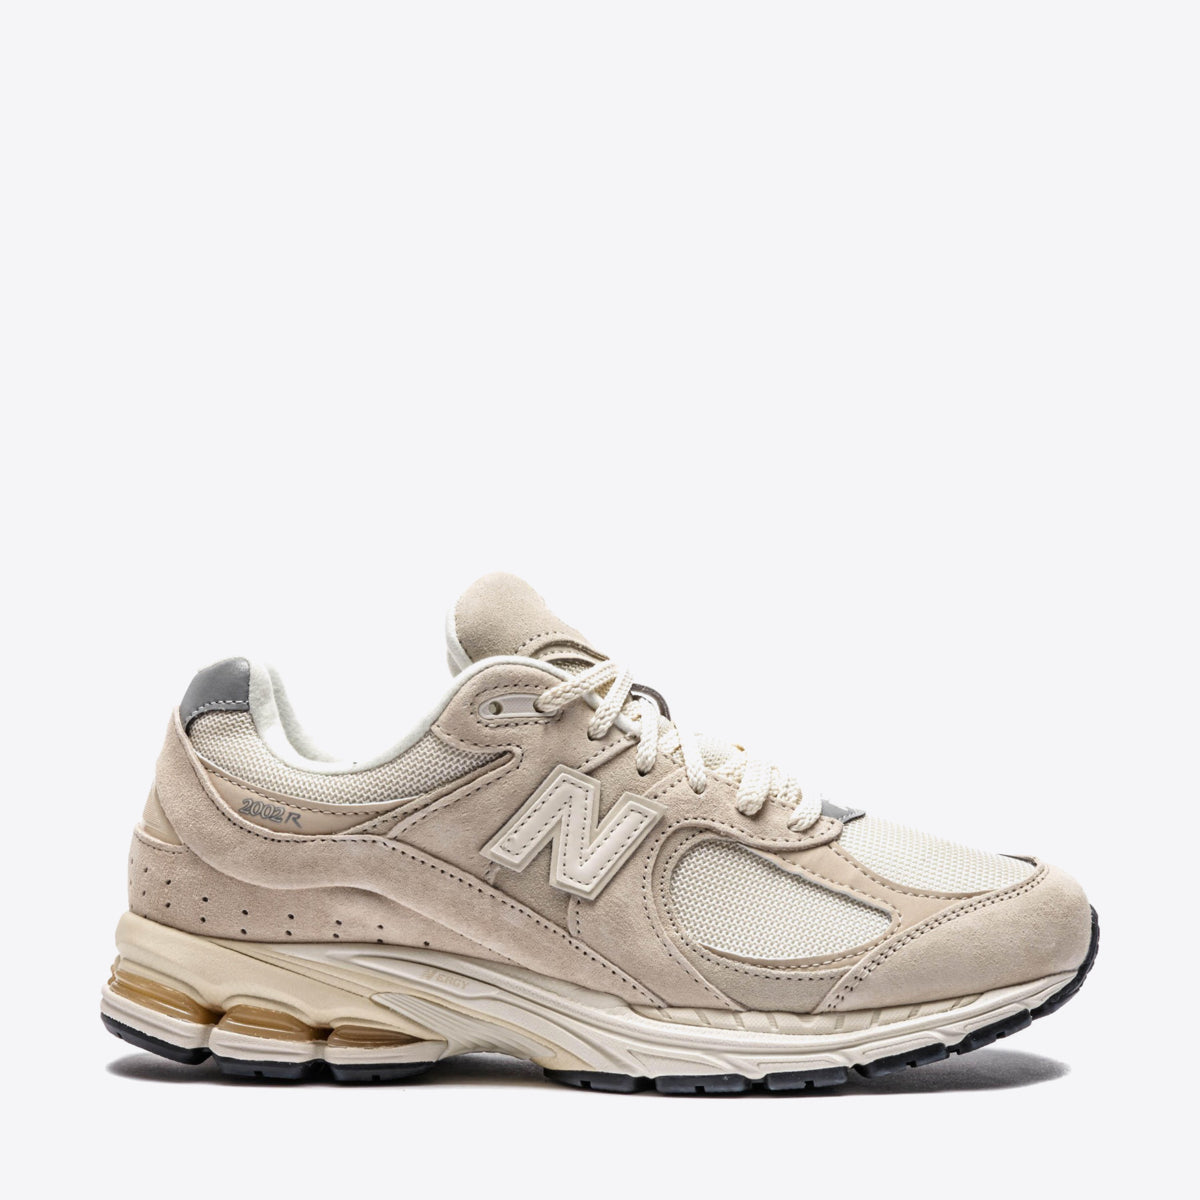 NEW BALANCE 2002R Sneaker Calm Taupe - Image 1